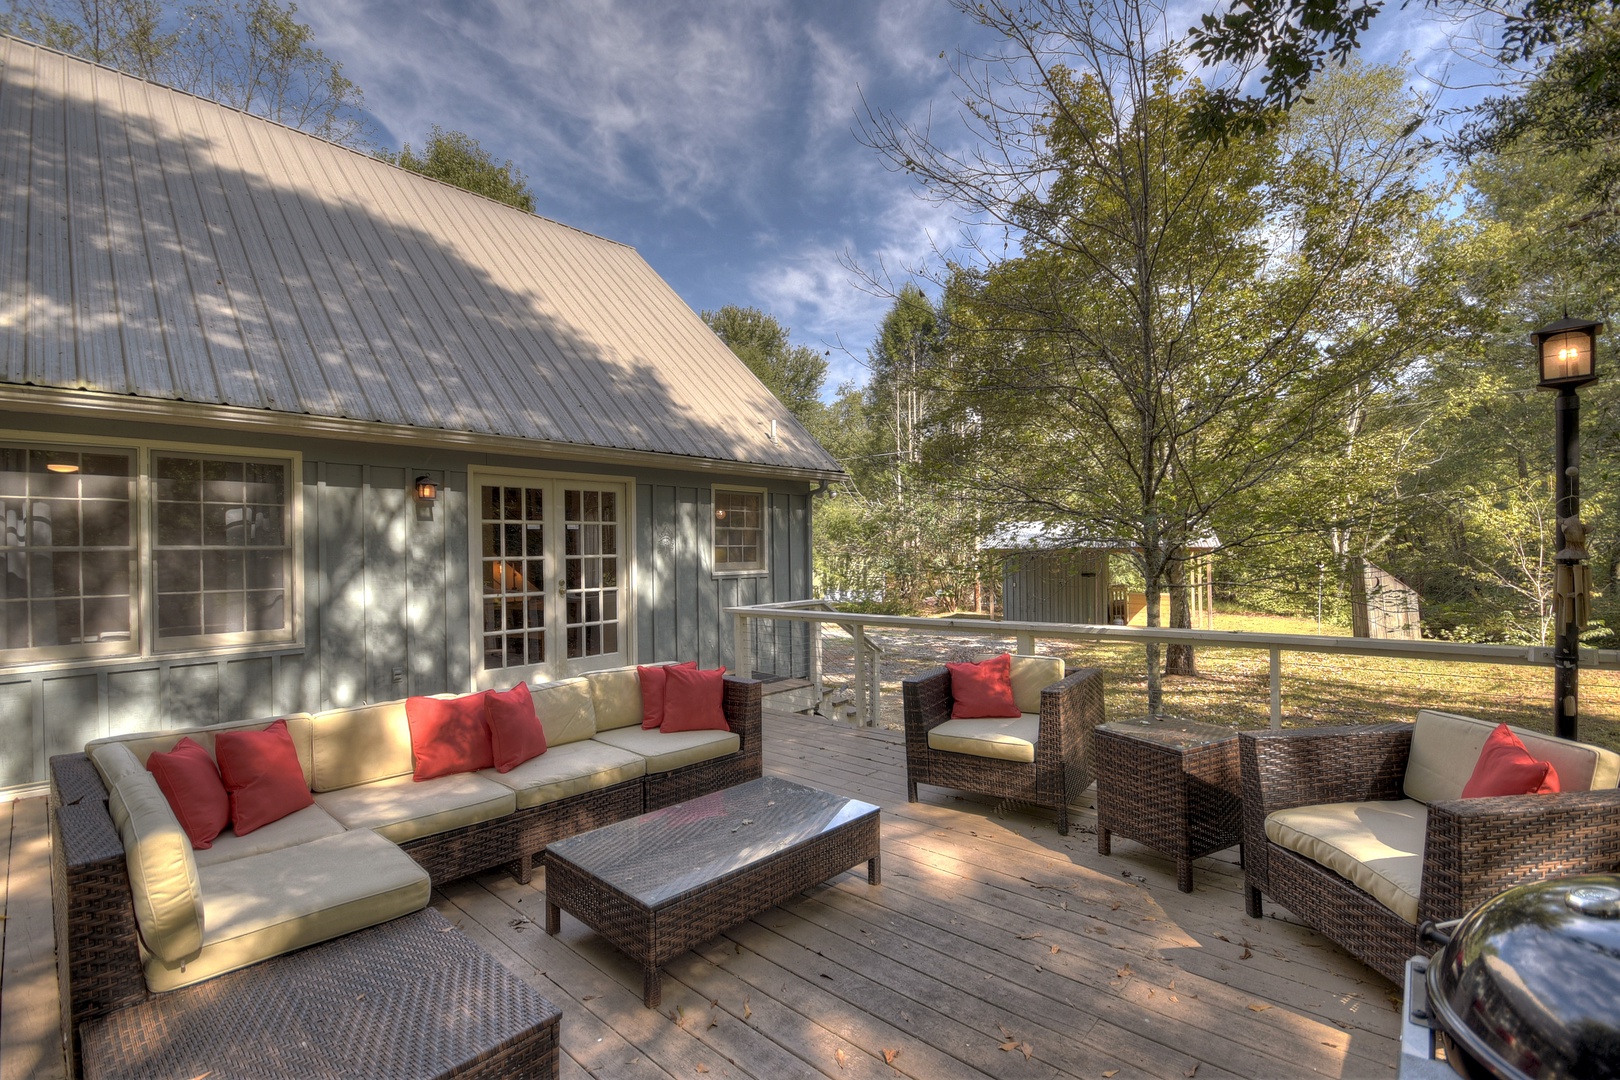 Sipping Rise- Back deck seating area with plenty of outdoor furniture and cabin access door